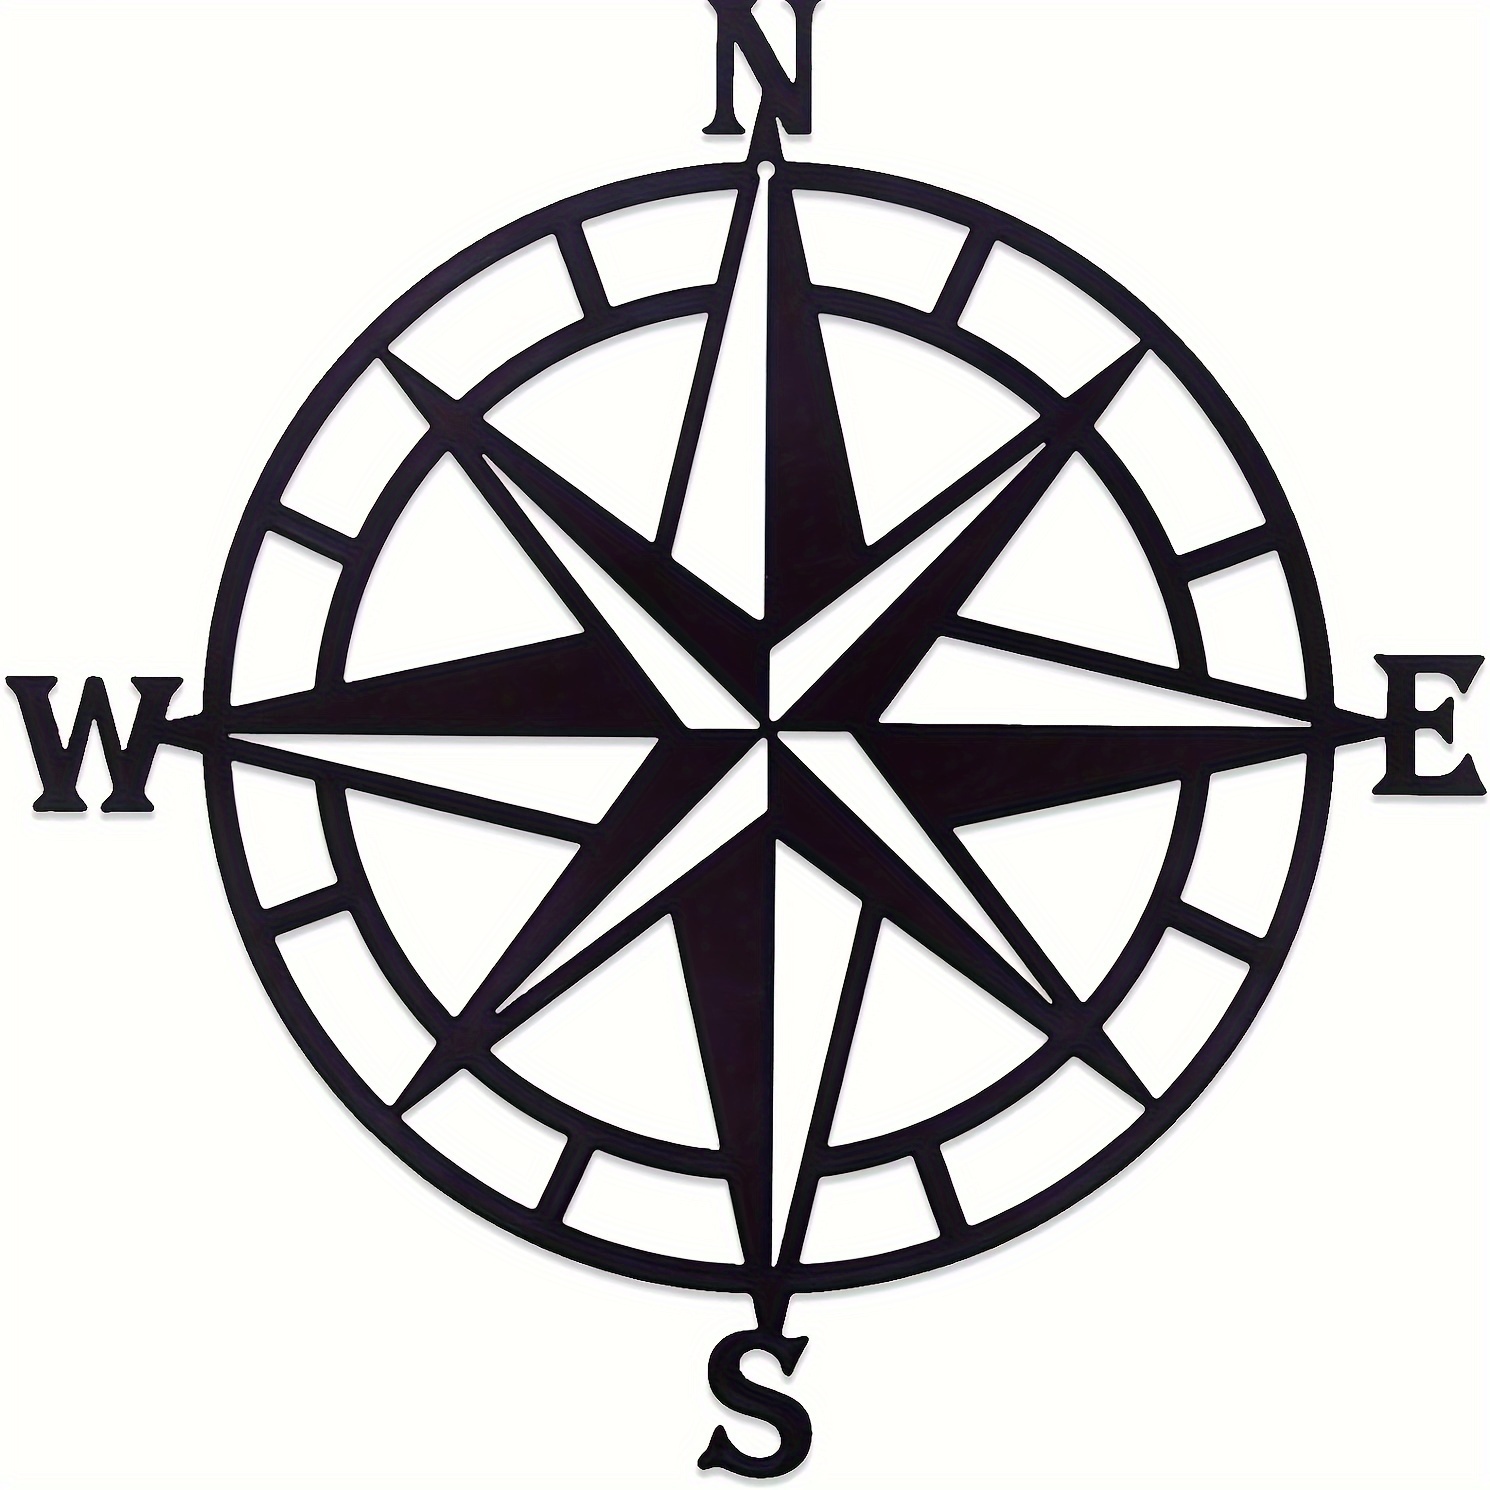 

1pc, Metal Decorative Nautical Compass Wall Decor, Living Room Bedroom Office Porch Garden Patio Signs Wall Hanging Art Beach Theme Home Decoration (black)